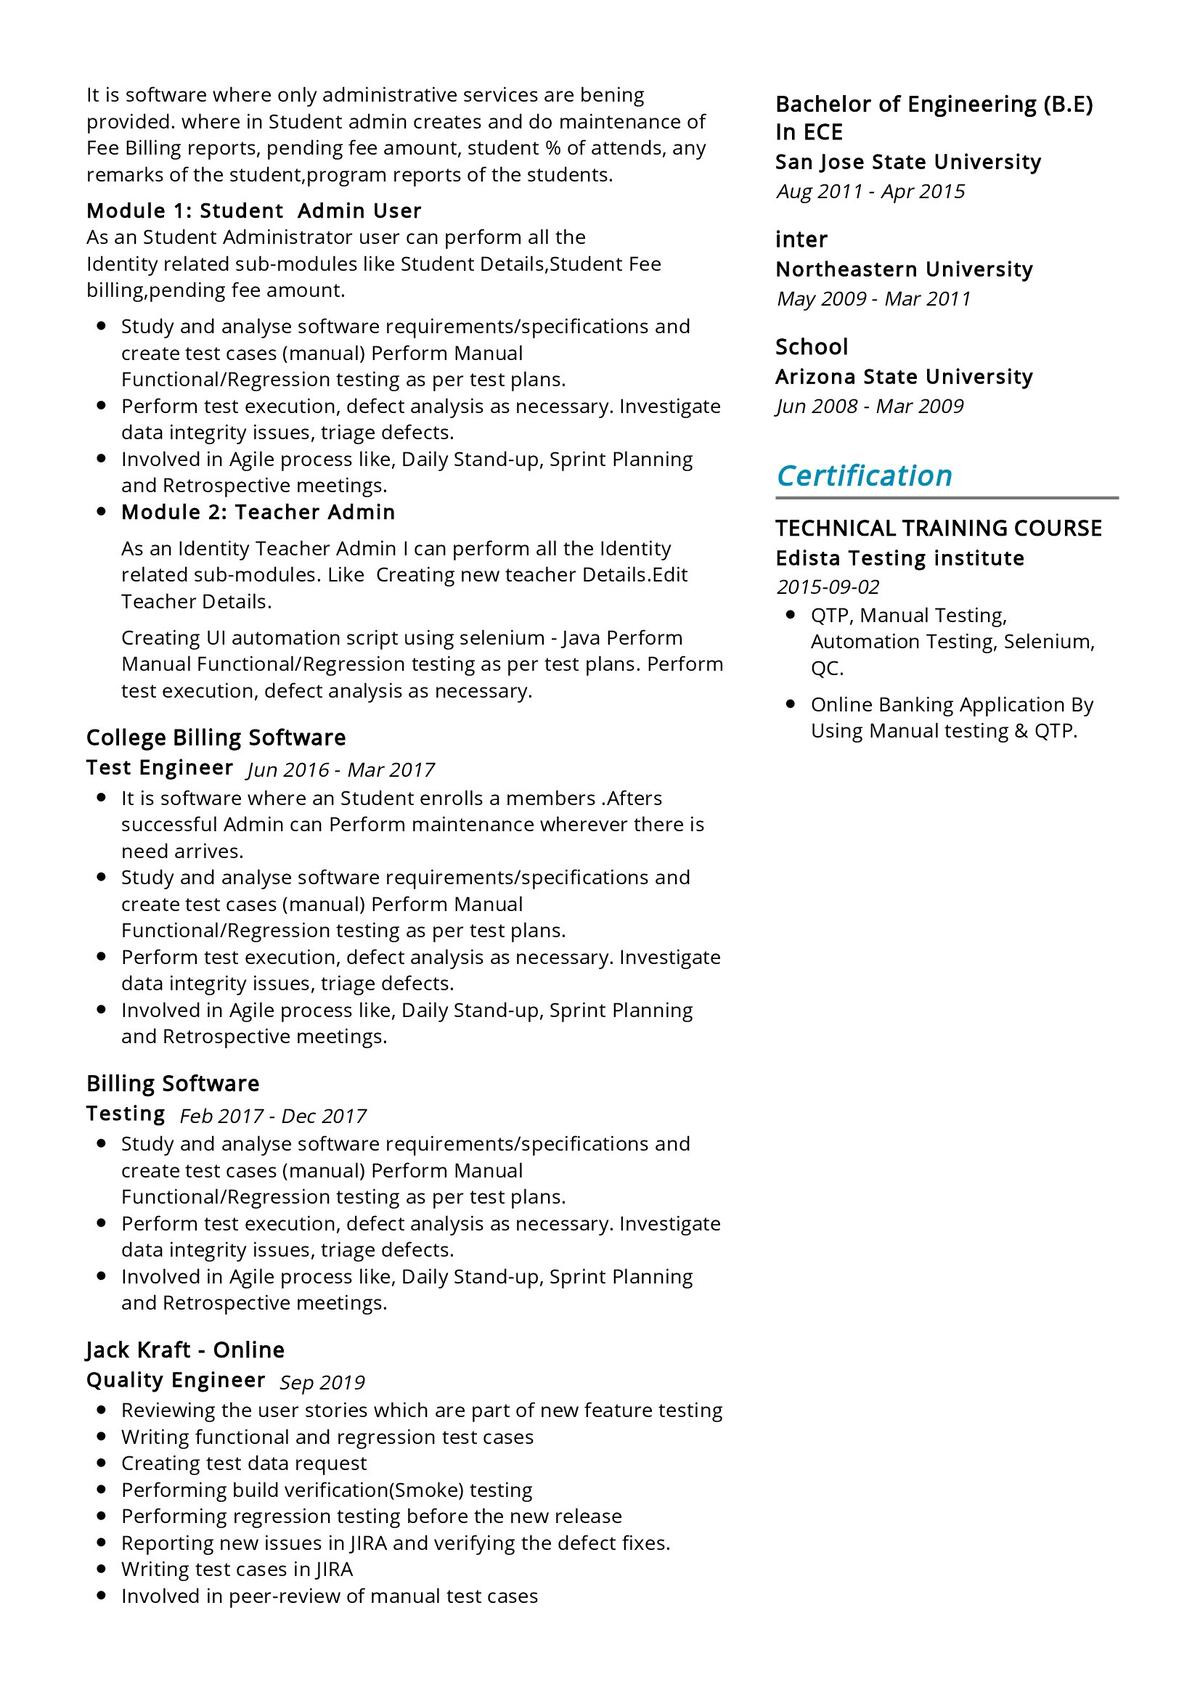 Software Testing Resume Samples for 6 Years Experience software Testing Resume Sample 2021 Writing Guide & Tips …